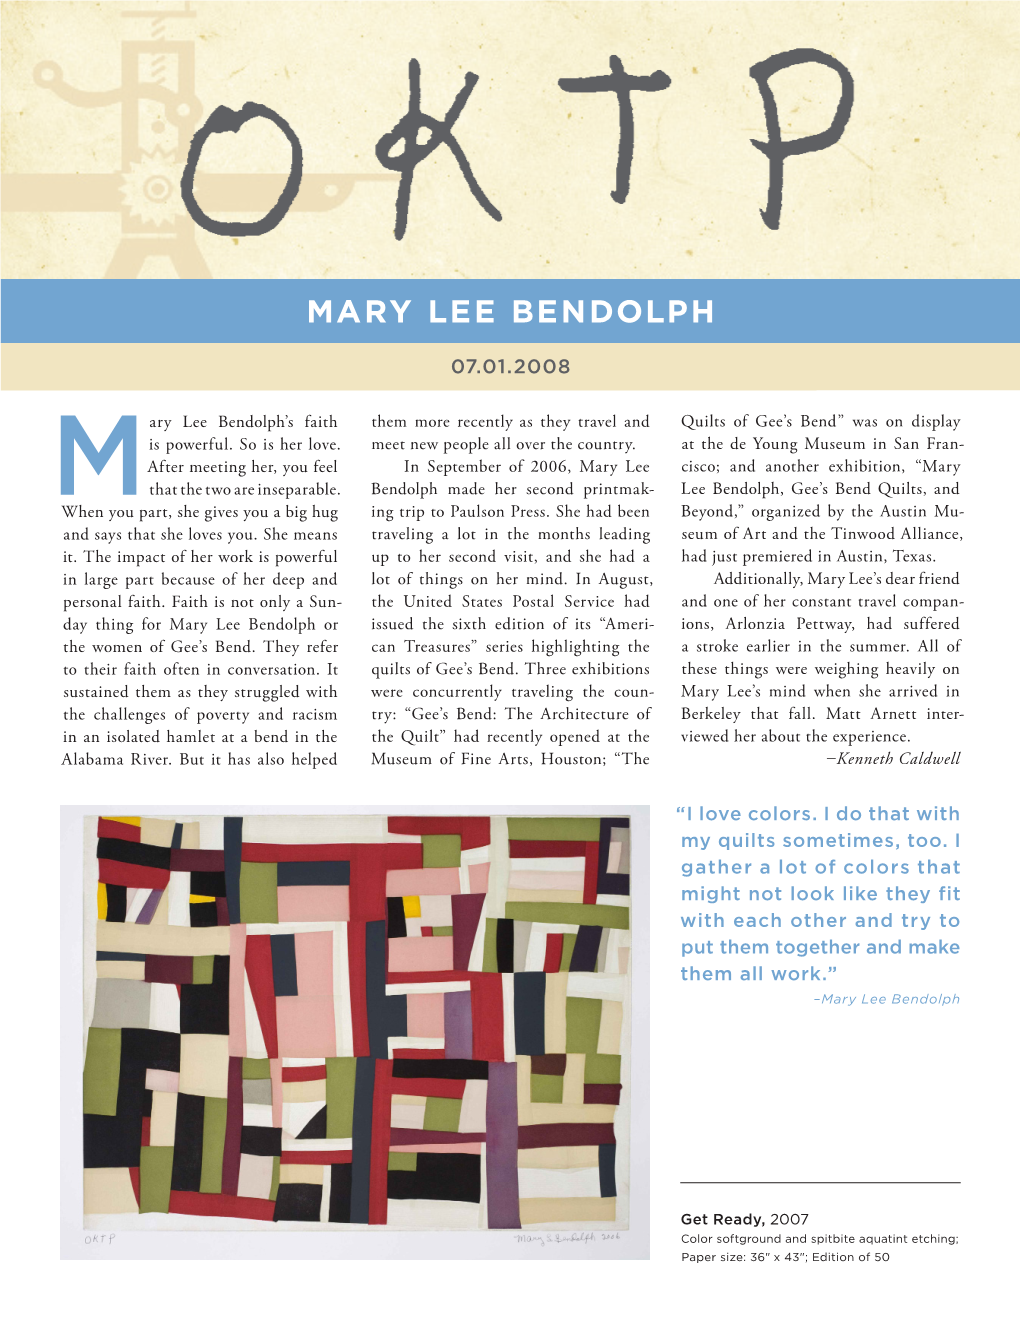 Mary Lee Bendolph